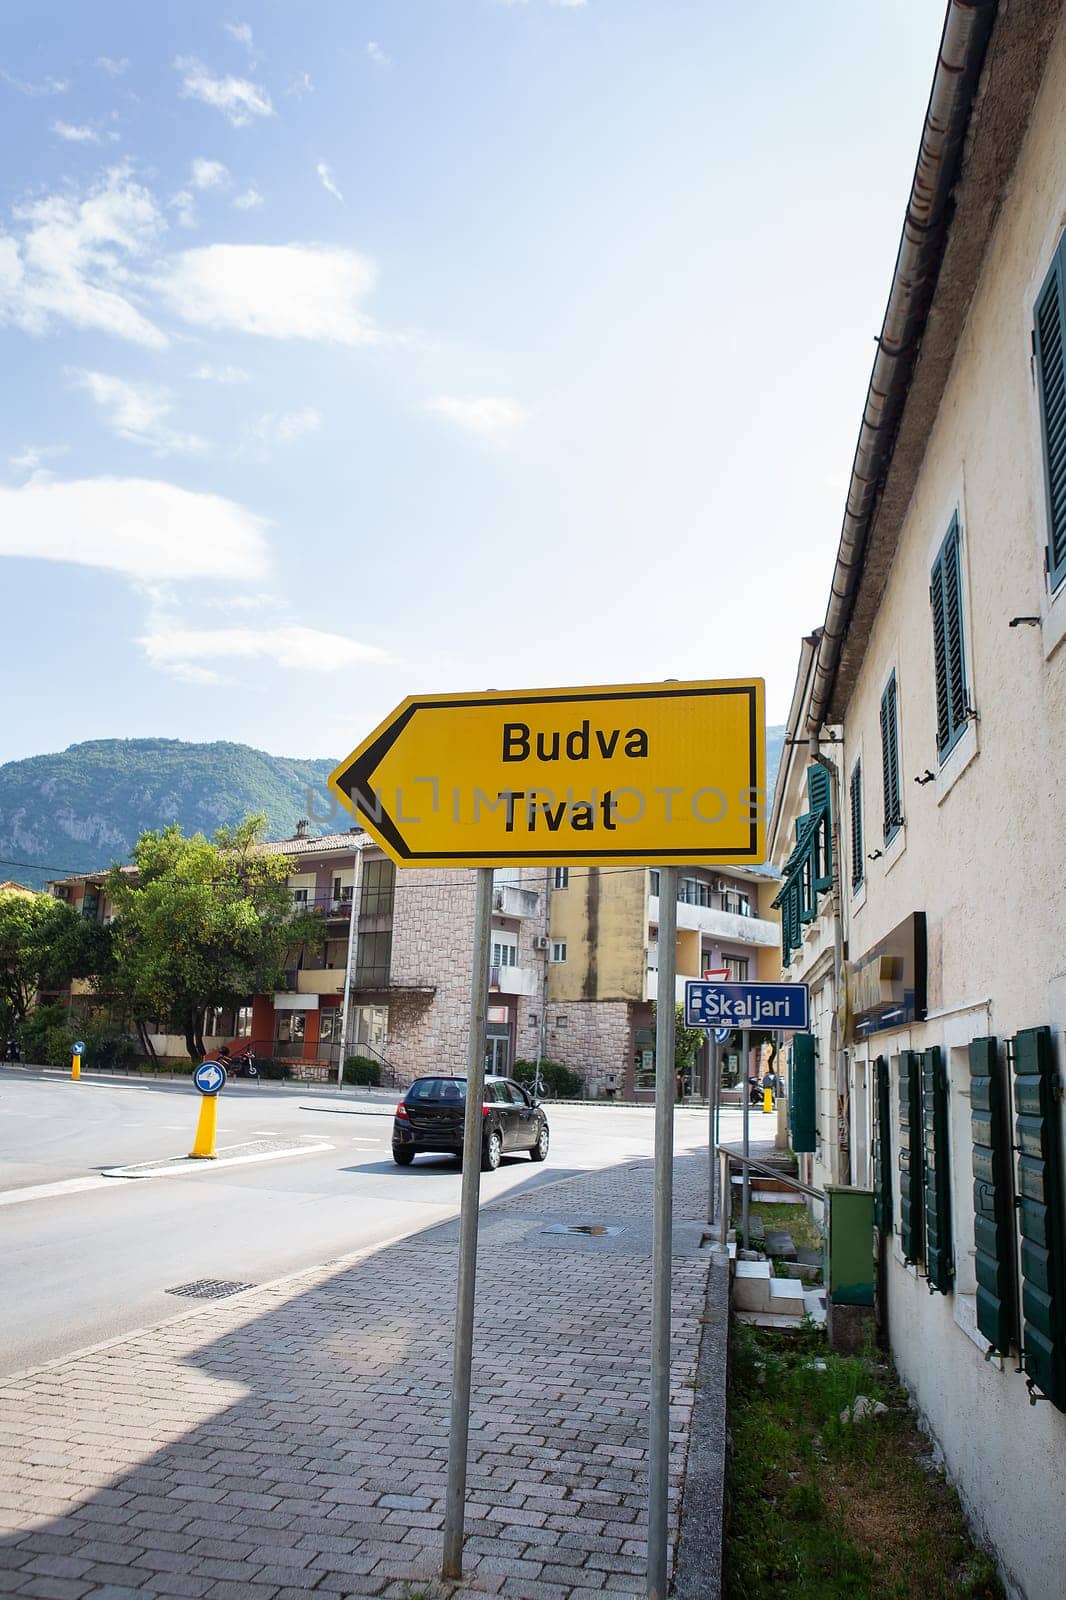 Photo of a road sign with the inscription of the cities of Budva and Tivat 05. 07. 2021 Kotor, Montenegro